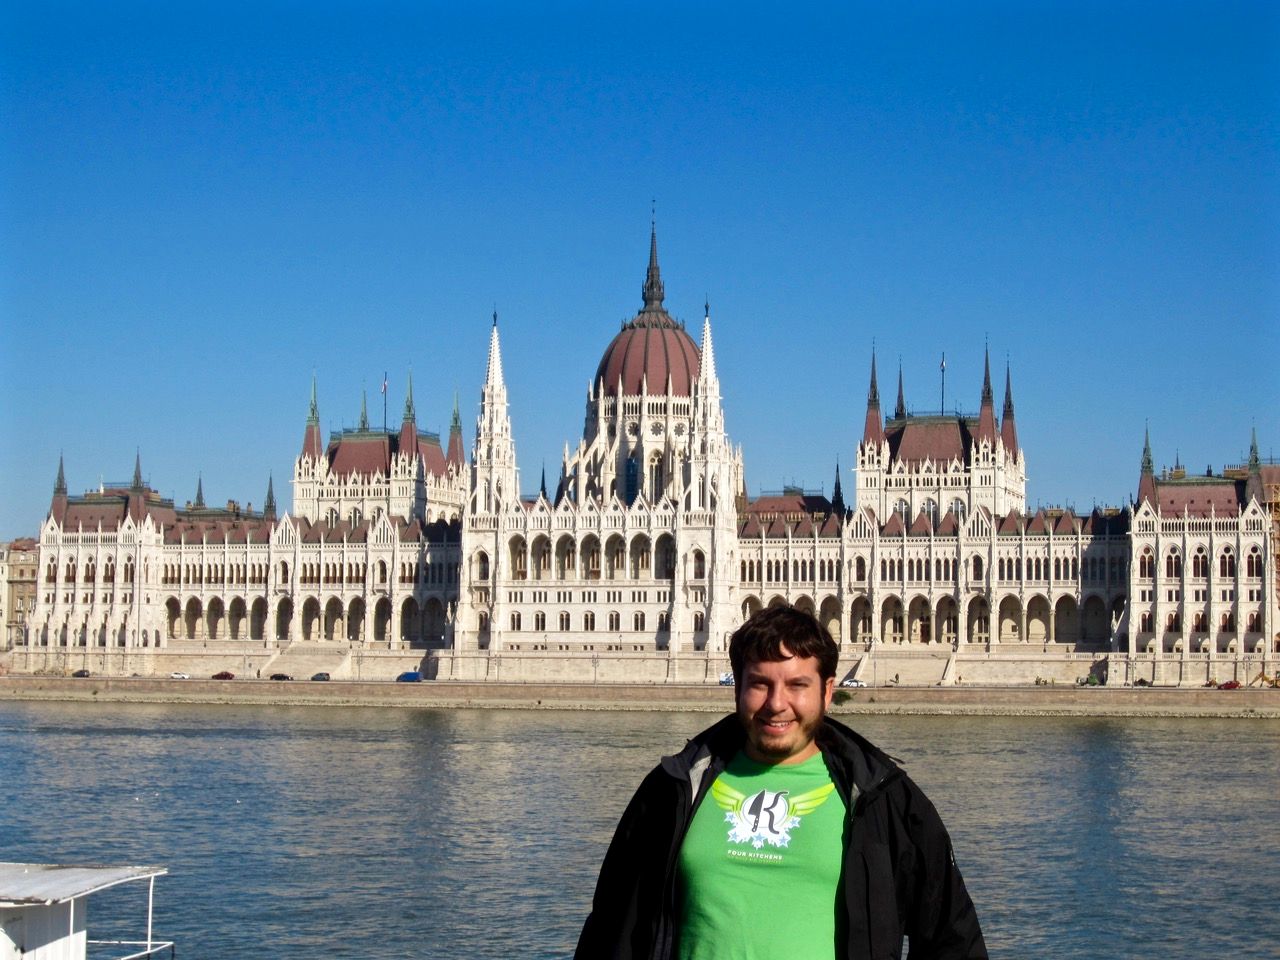 Chris posing in front of the parliment building in Budapest.